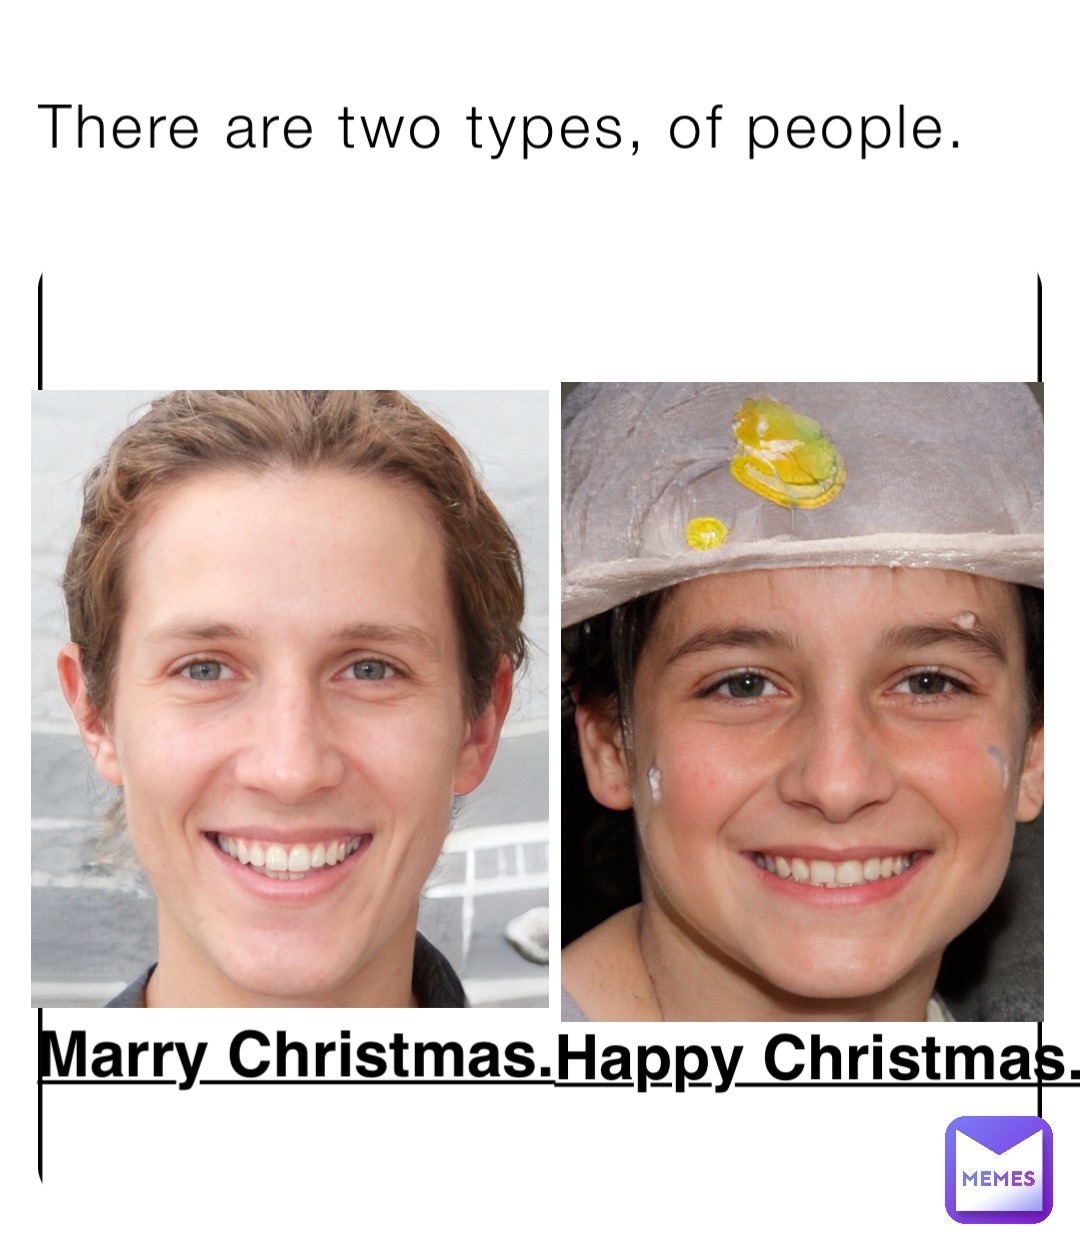 There are two types, of people. Marry Christmas. Happy Christmas.